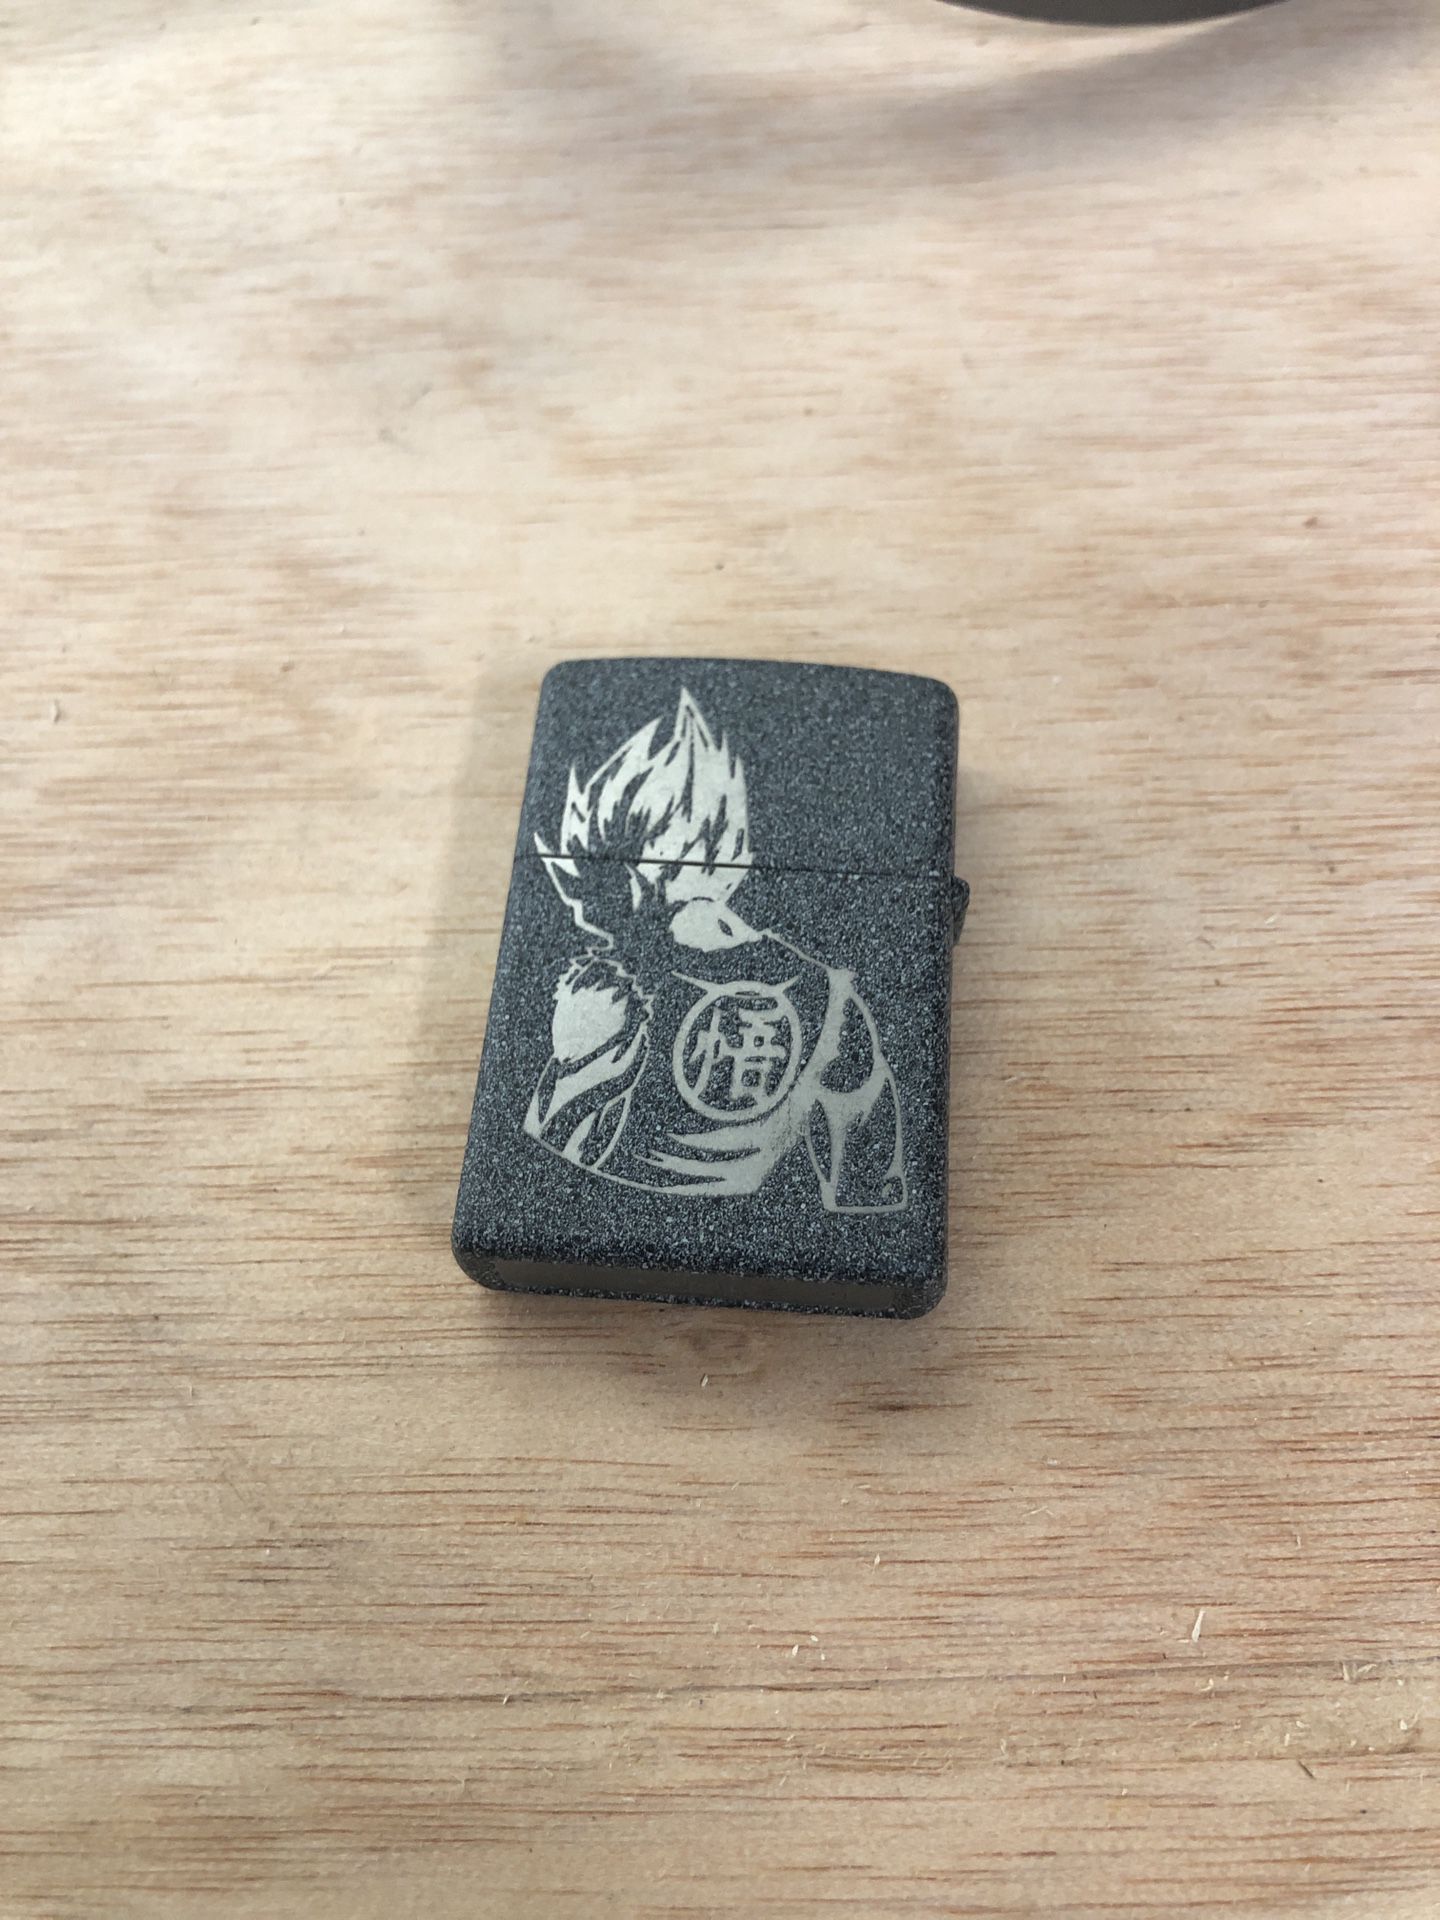 Zippo lighter etched dragon ball theme used only a few times